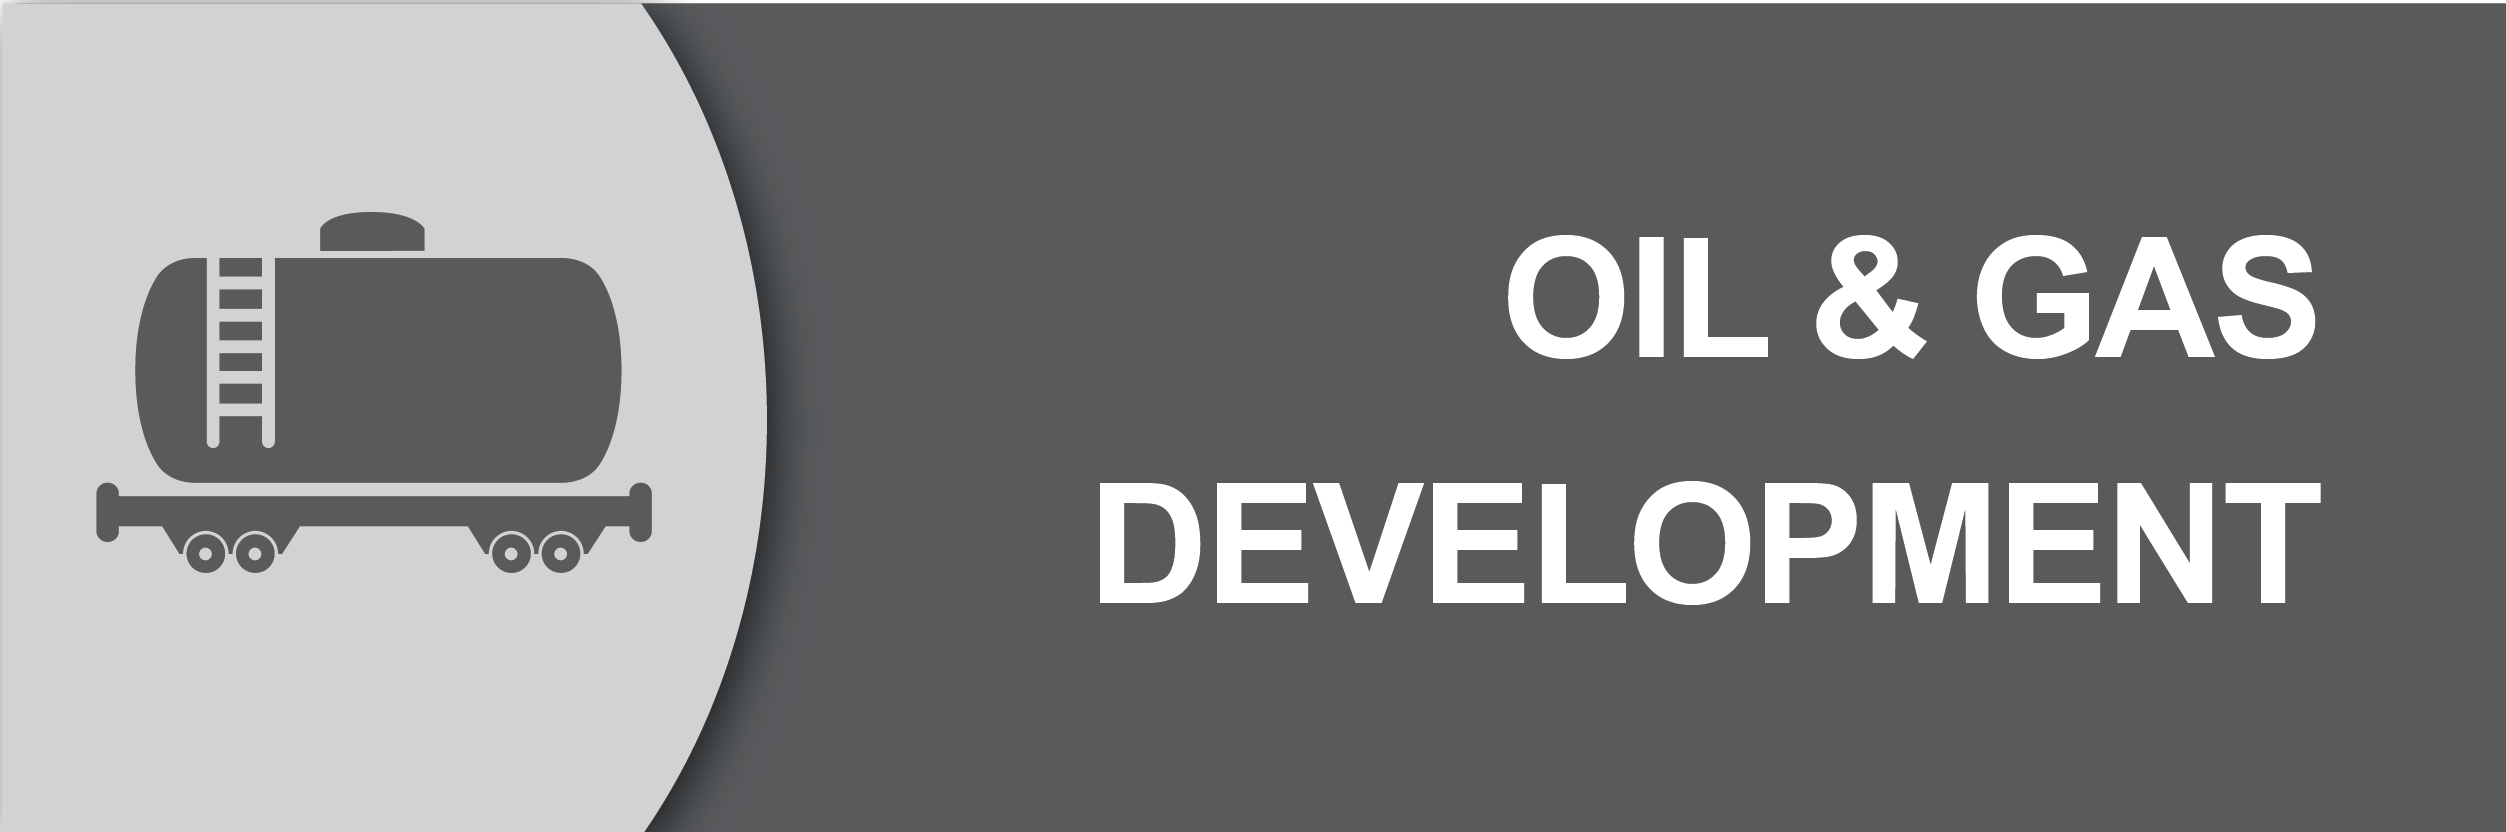 Icon with words "Oil & Gas Development"